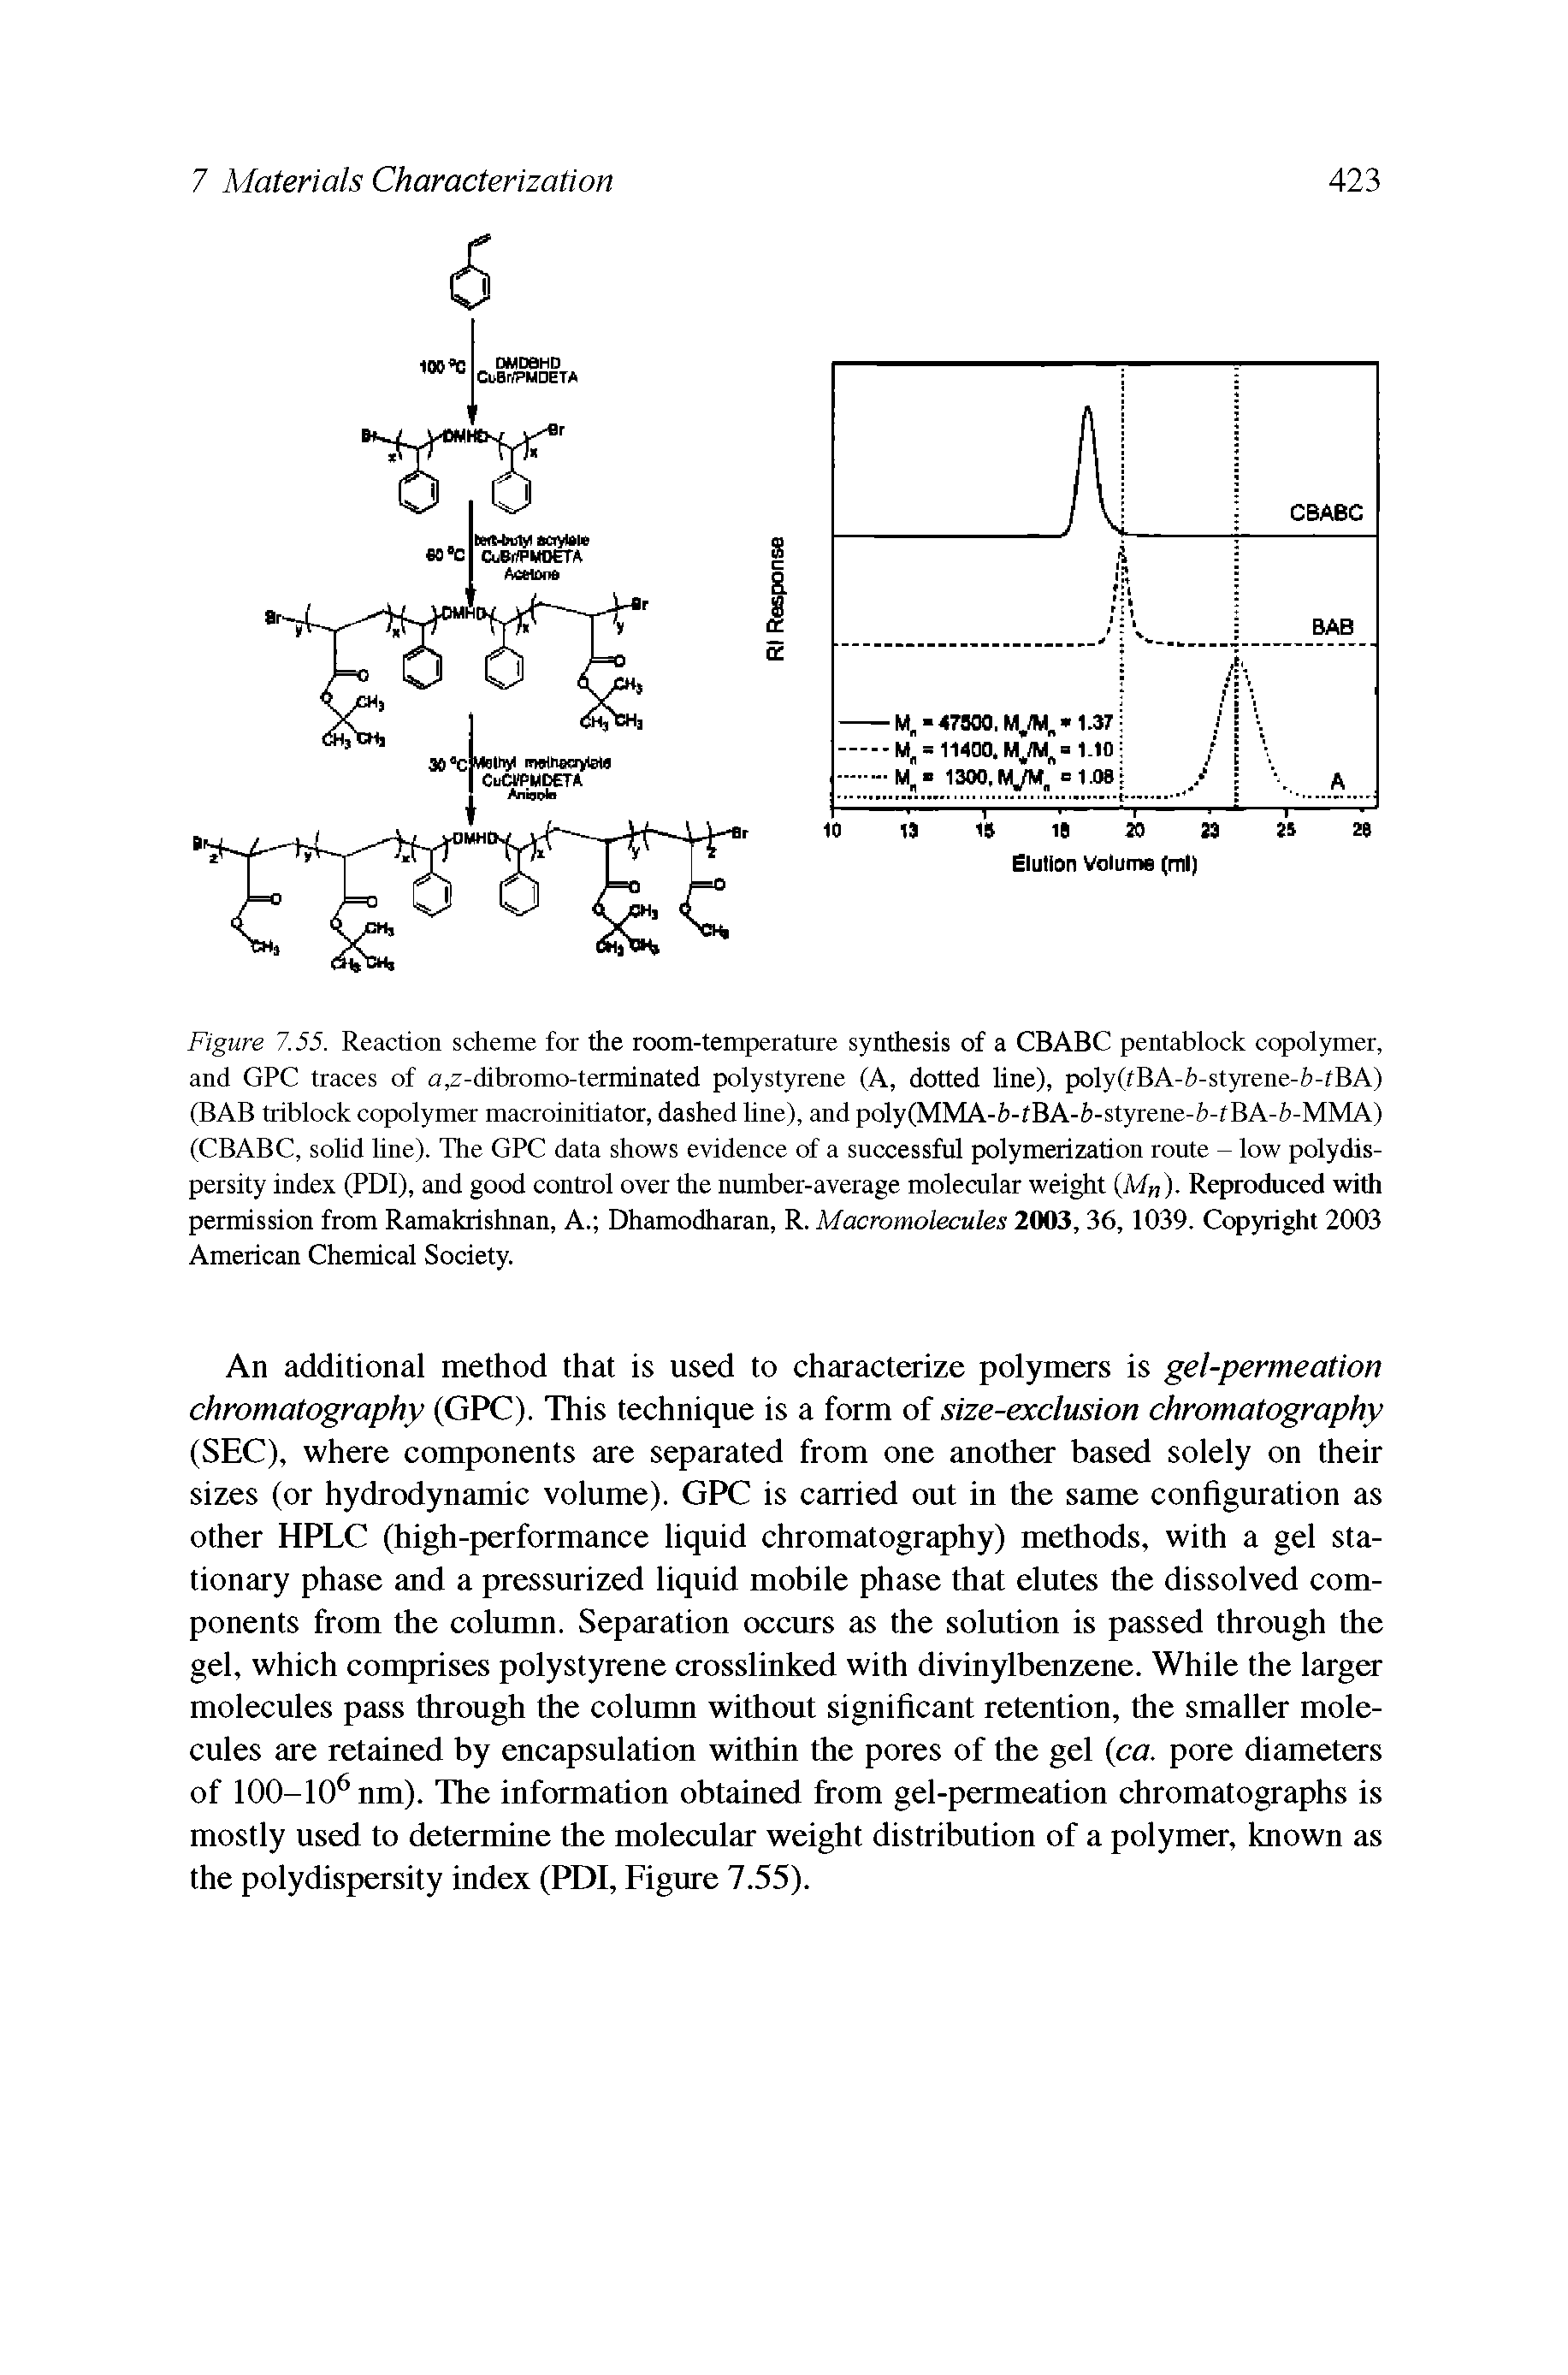 Figure 7.55. Reaction scheme for the room-temperature synthesis of a CBABC pentablock copolymer, and GPC traces of a,z-dibromo-terminated polystyrene (A, dotted line), poly(fBA-fe-styrene-fe-fBA) (BAB triblock copolymer macroinitiator, dashed line), and poly(MMA-fe-fBA-fe-styrene-fe-f BA-fe-MMA) (CBABC, solid line). The GPC data shows evidence of a successful polymerization route - low polydis-persity index (PDI), and good control over the number-average molecular weight (Mn). Reproduced with permission from Ramakrishnan, A. Dhamodharan, R. Macromolecules 2003, 36, 1039. Copyright 2003 American Chemical Society.